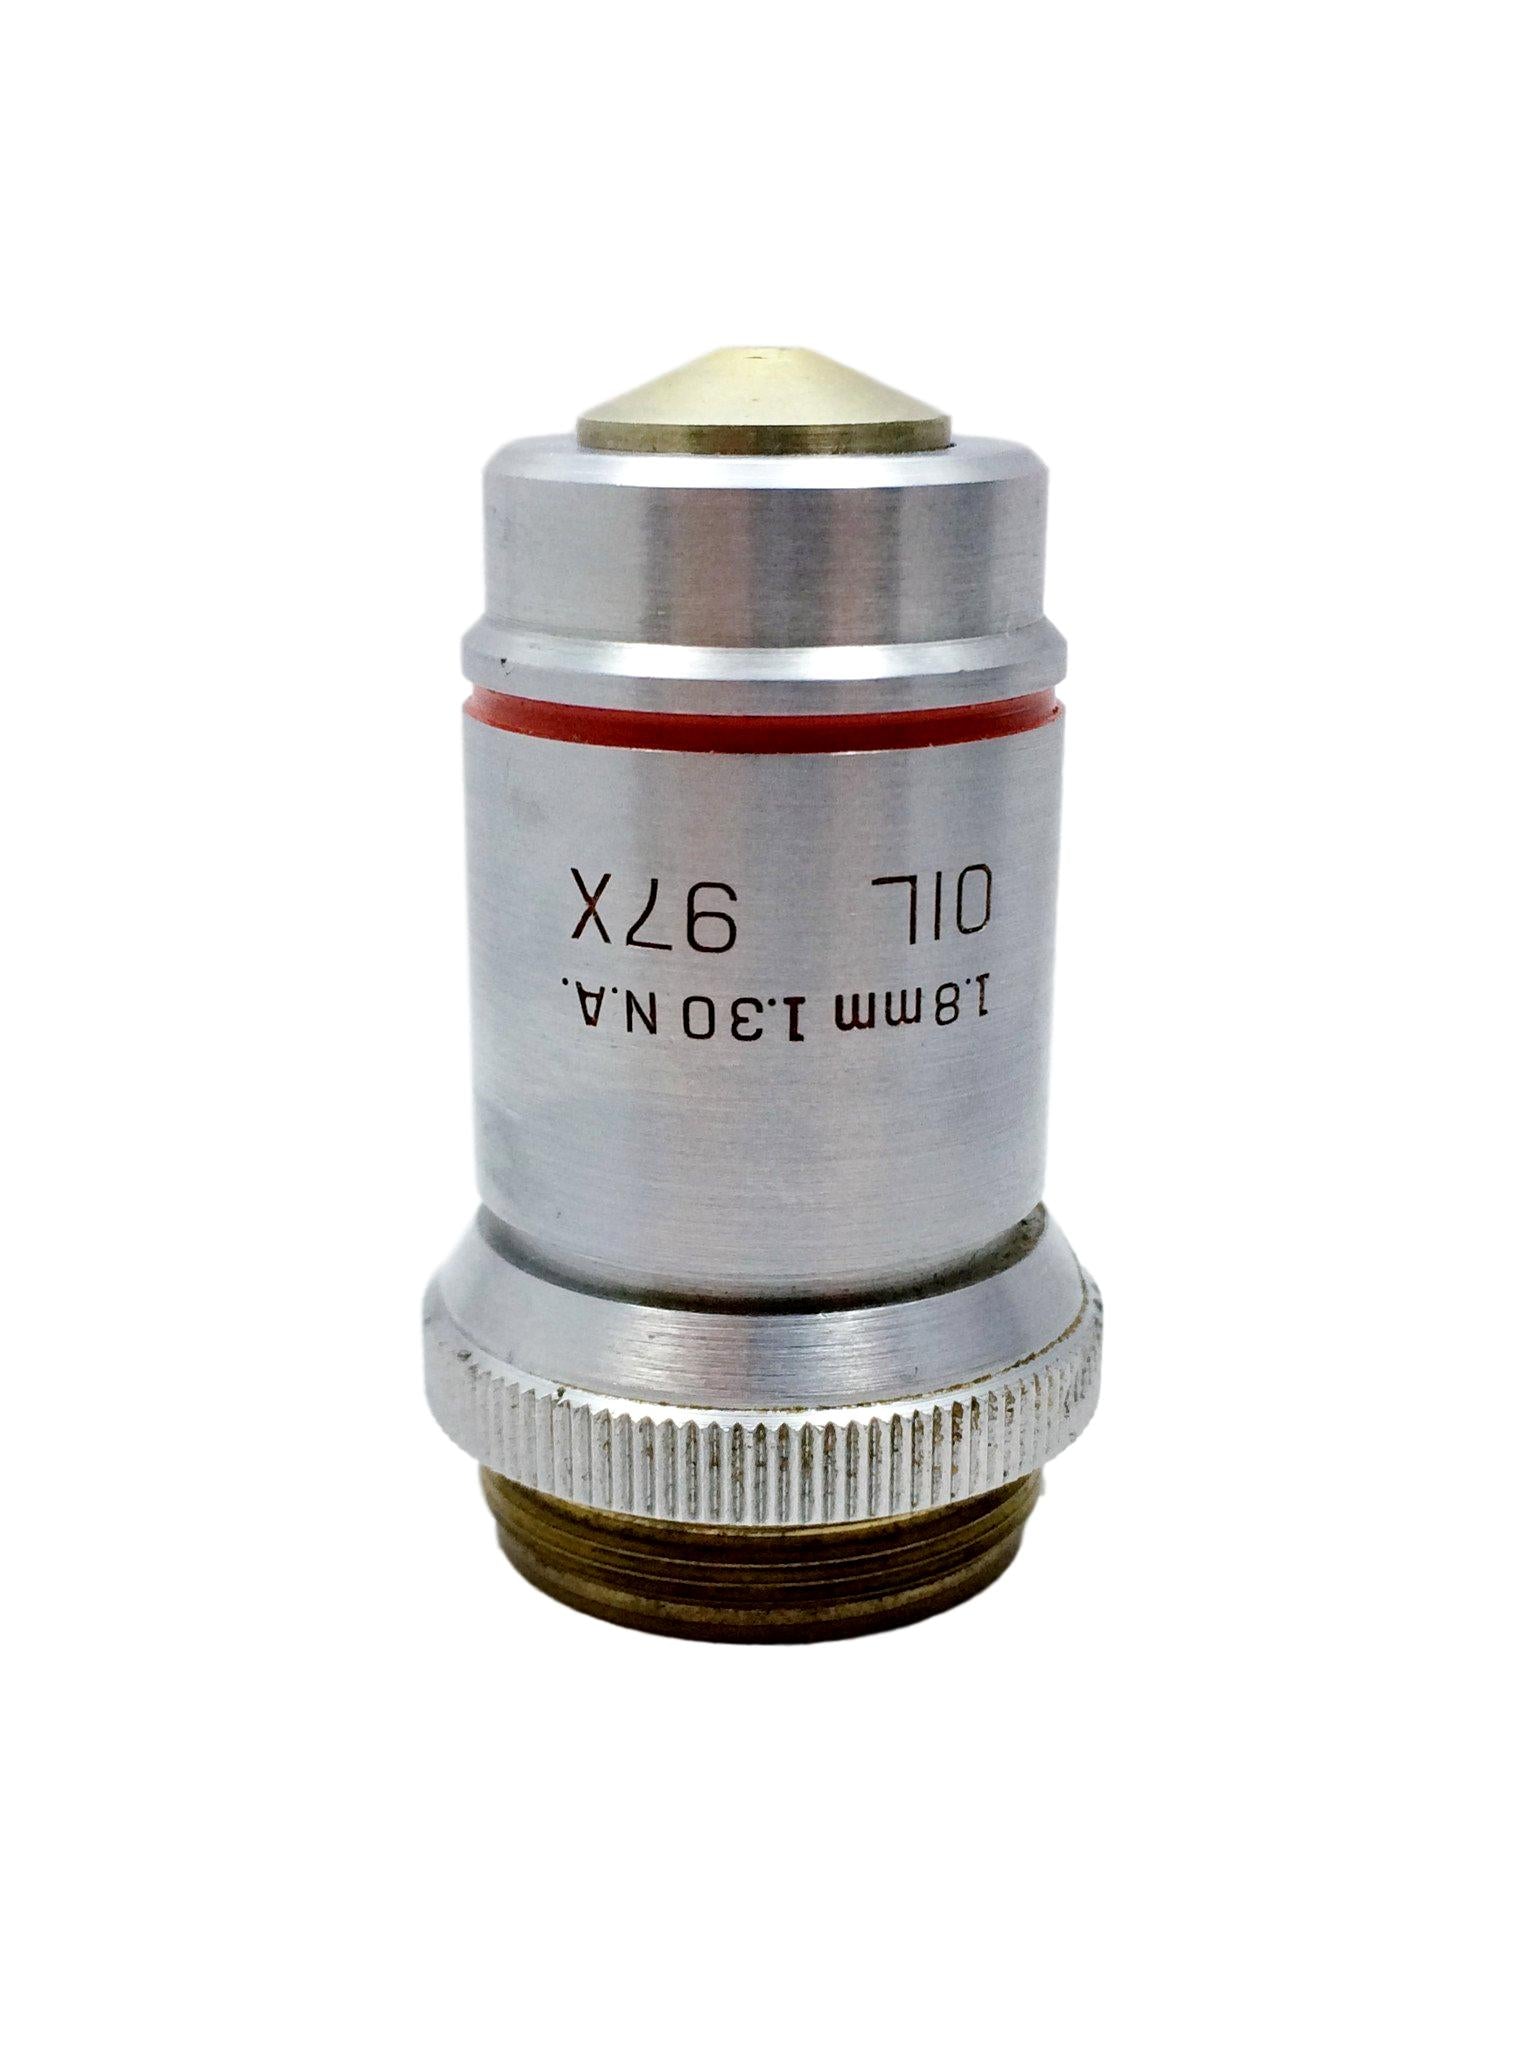 Bausch & Lomb 97X Oil (1.8mm) Microscope Objective